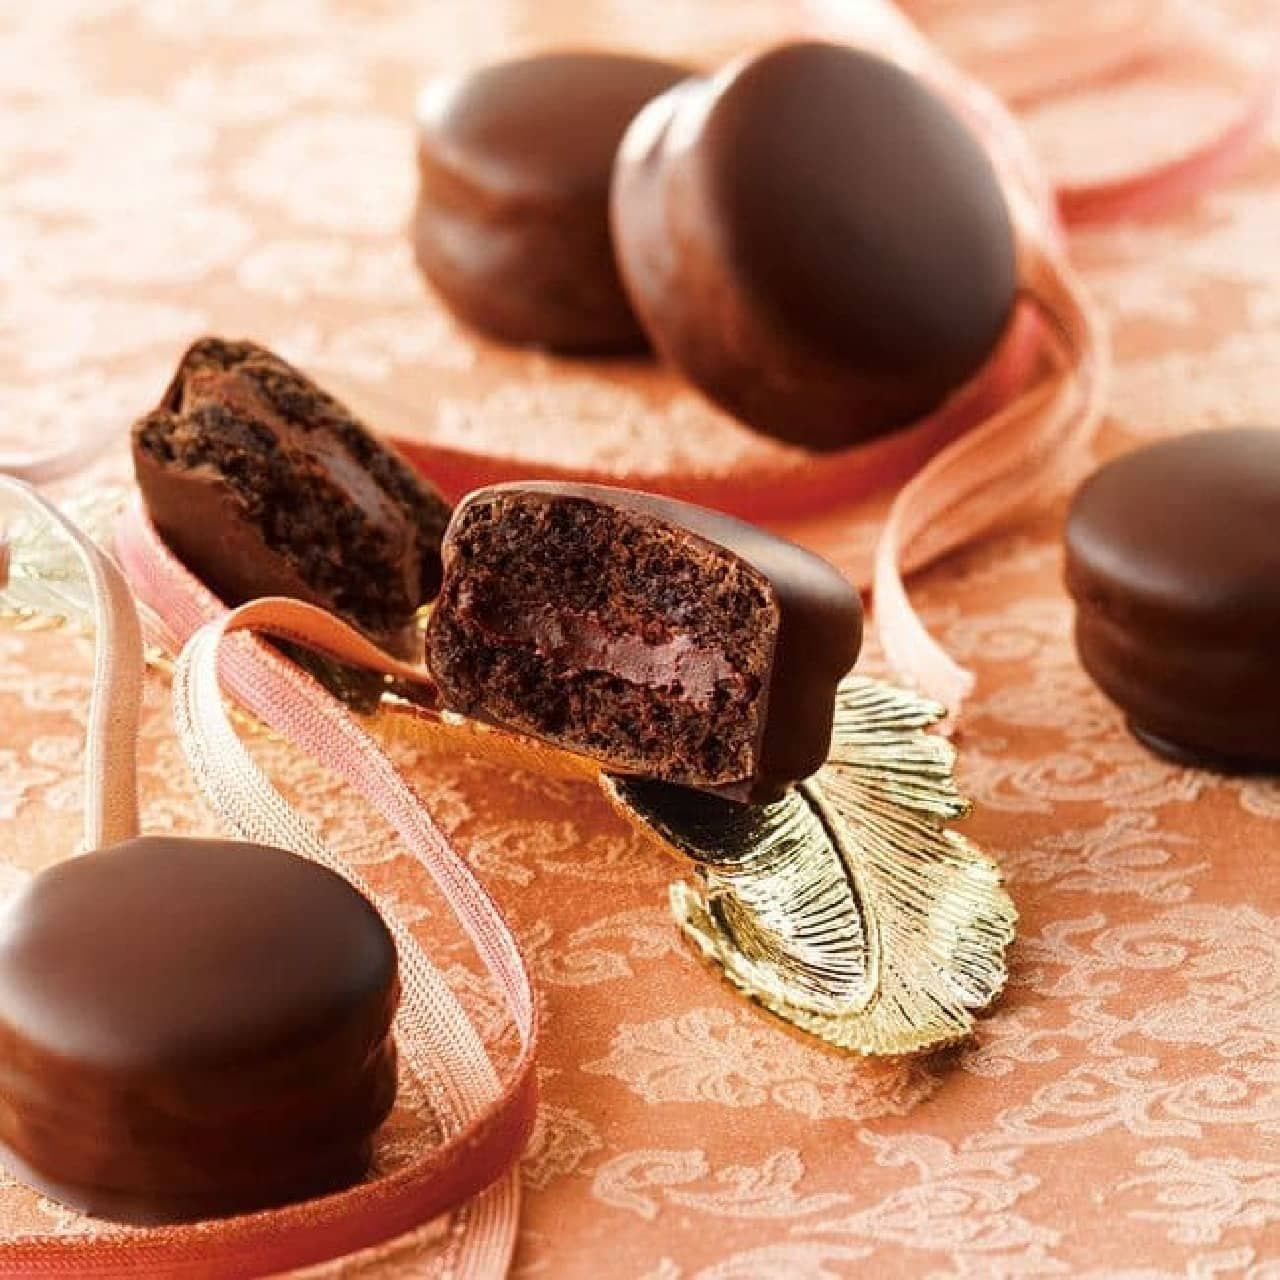 Royce's cacao macaroons [6 pieces]